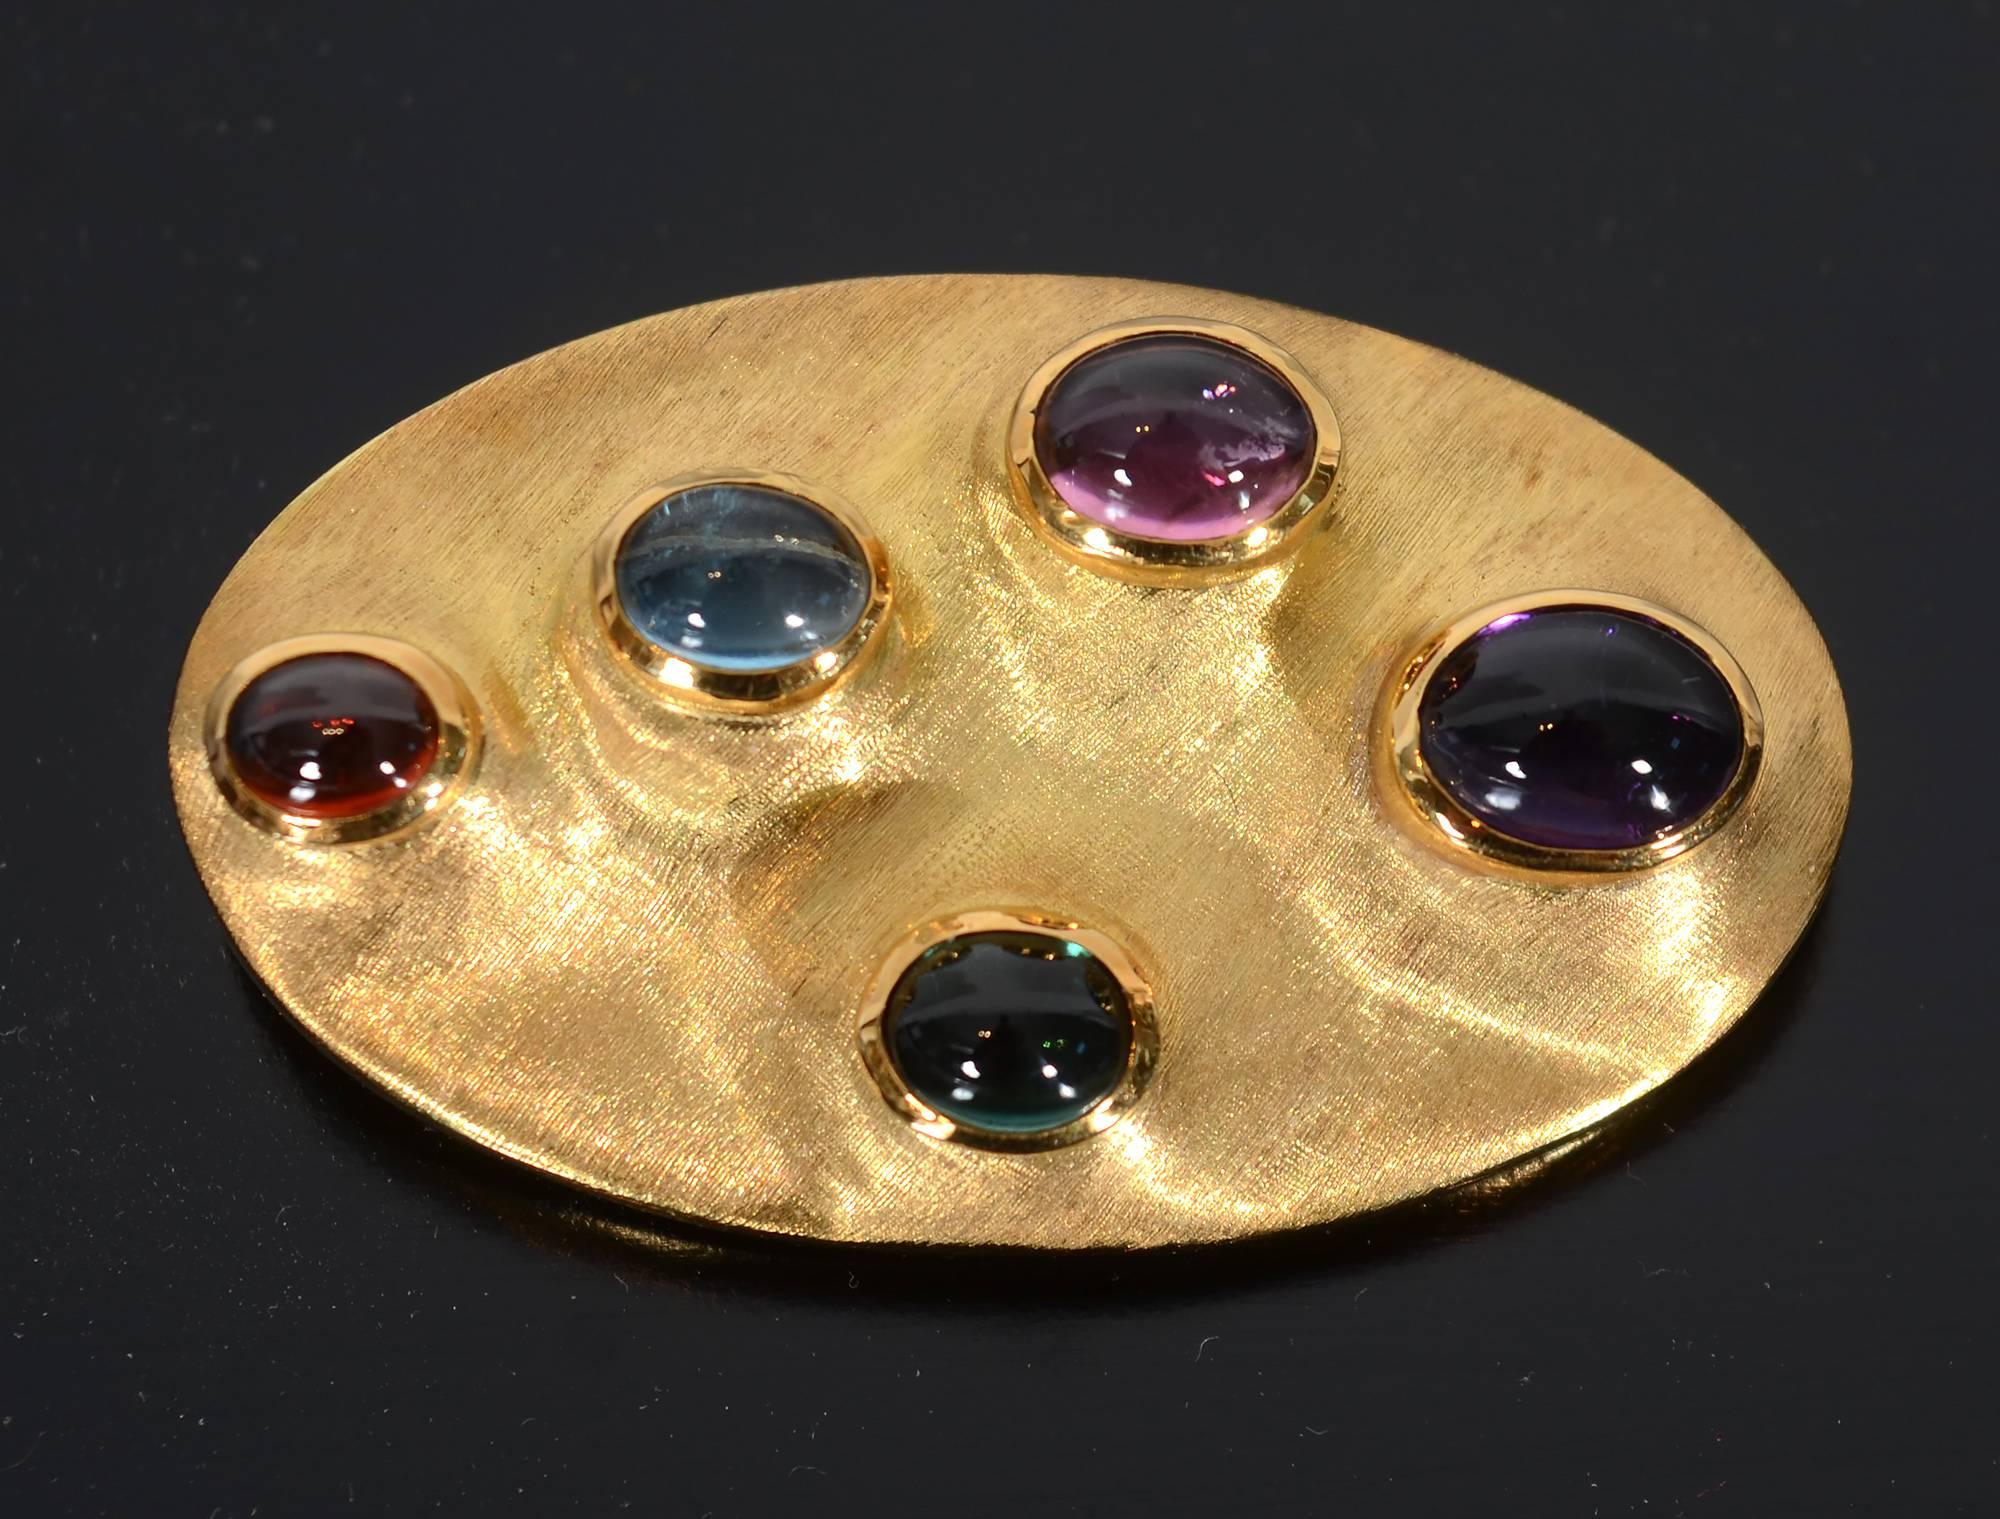 Unusual brooch by Brazilian jewelers Roberto and Haroldo Burle Marx. In addition to having a soft burnished finish, the brooch is enhanced by an undulating surface. Irregularities are quite intentional - not flaws. The oval cabochon stones are